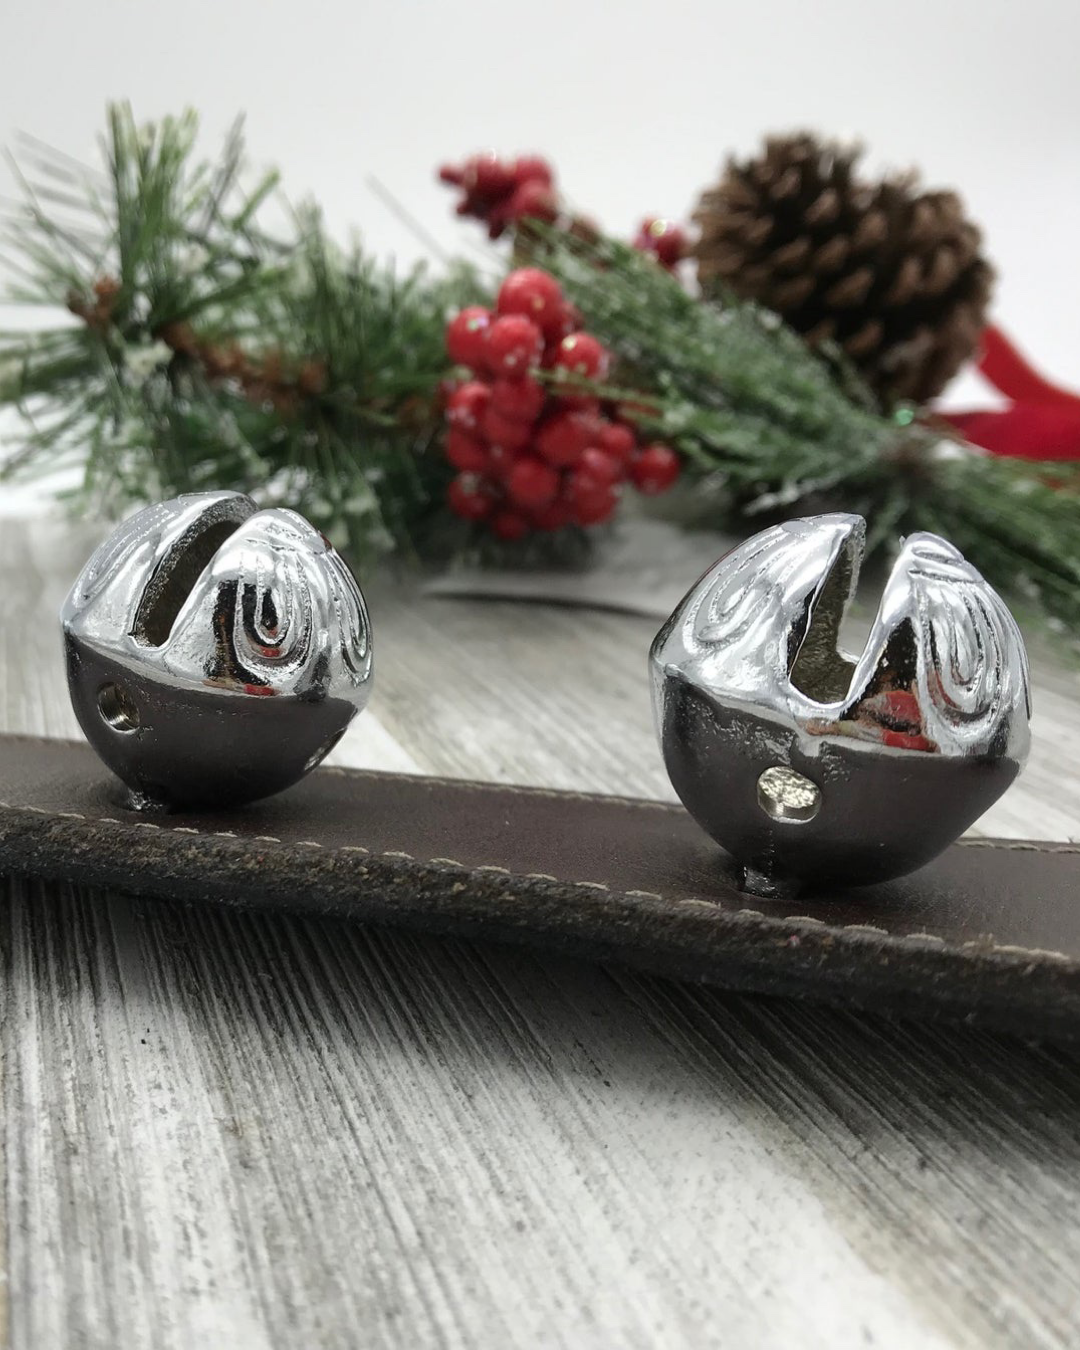 6 Authentic Solid Brass Sleigh Bells With A Door Ring, Handmade Leather Sleigh Bells Set, Handmade In USA.